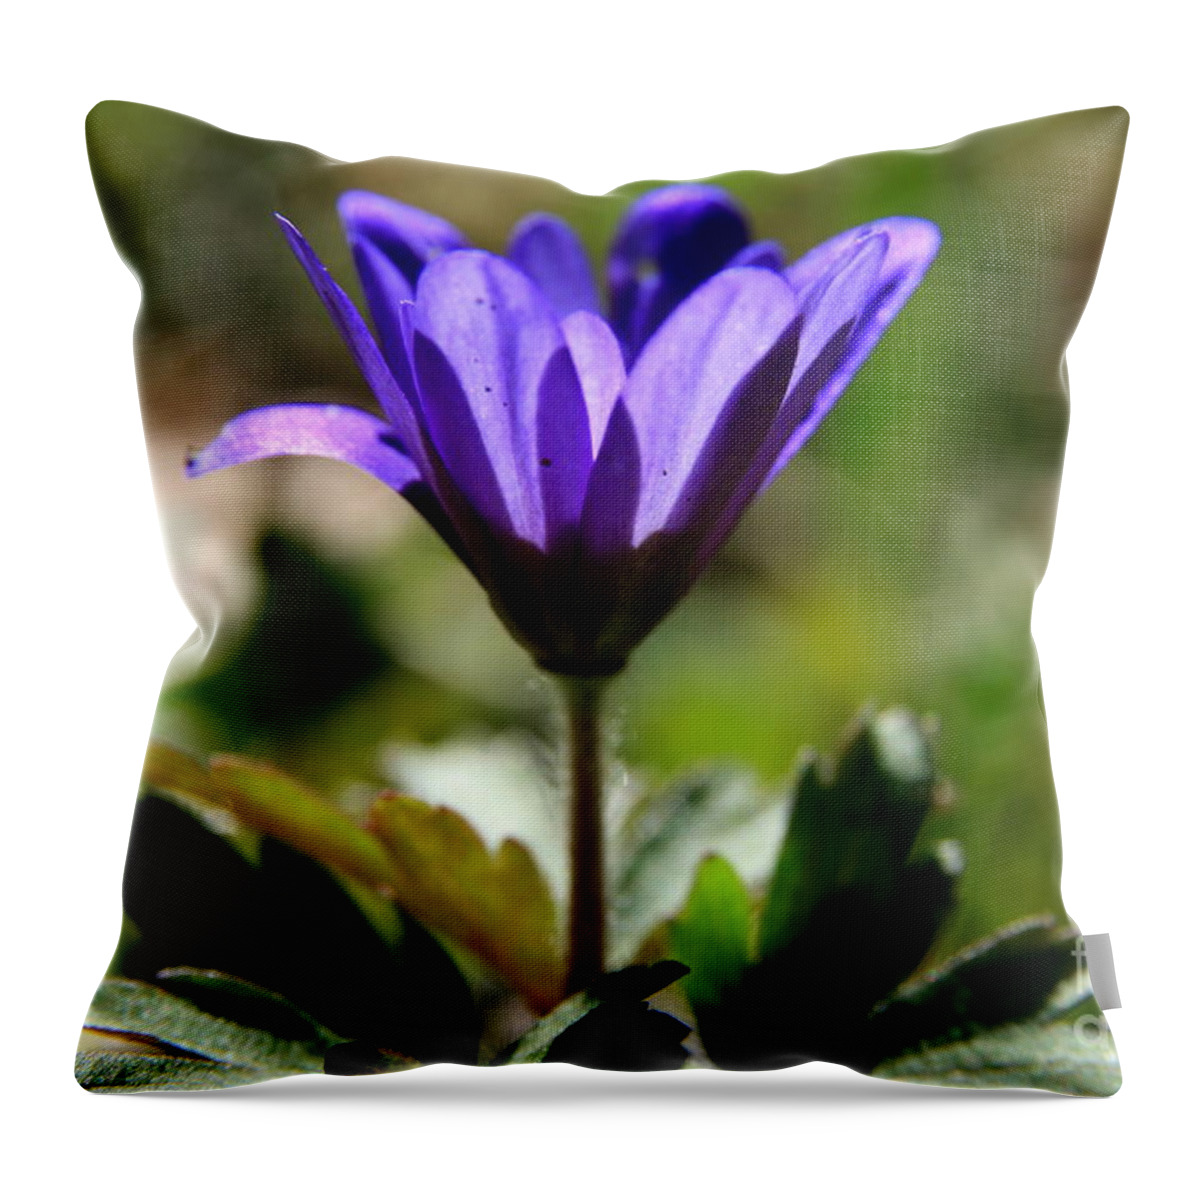 Floral Throw Pillow featuring the photograph Spring Welcome by Neal Eslinger